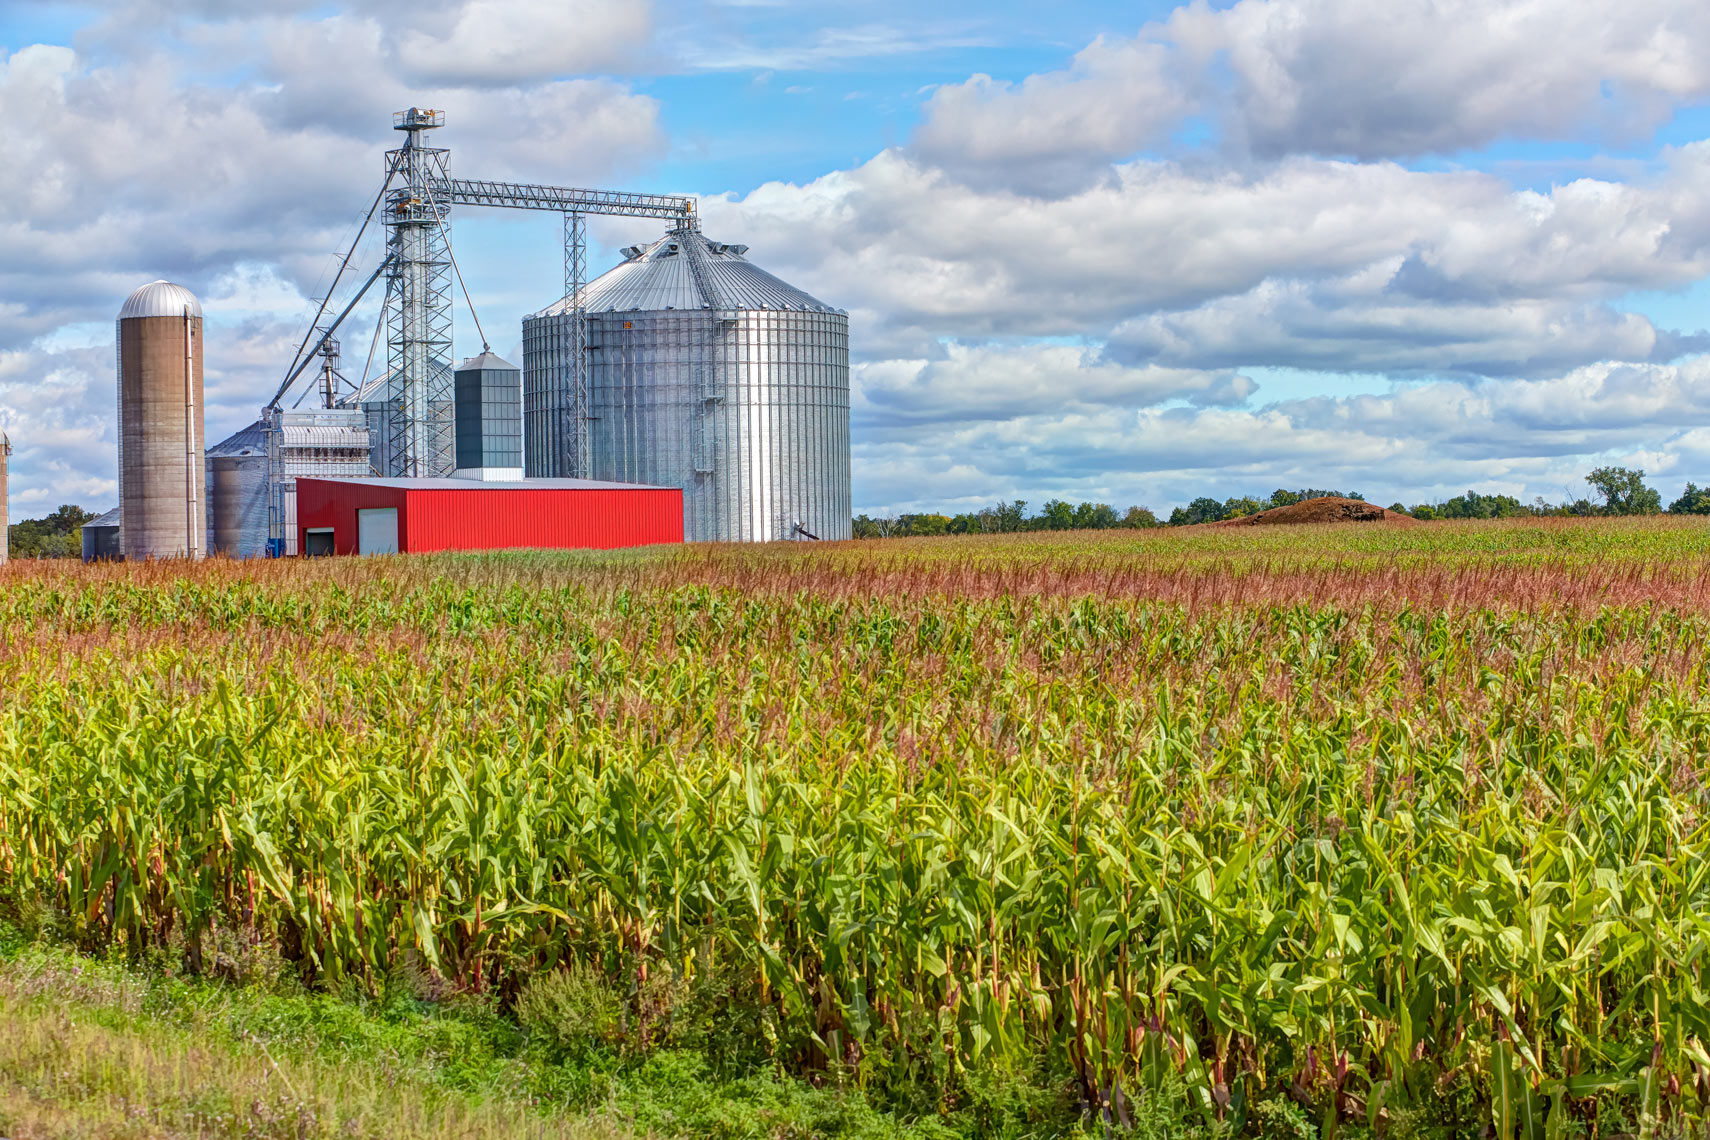 Silos/silver/cornfield/agriculture photography